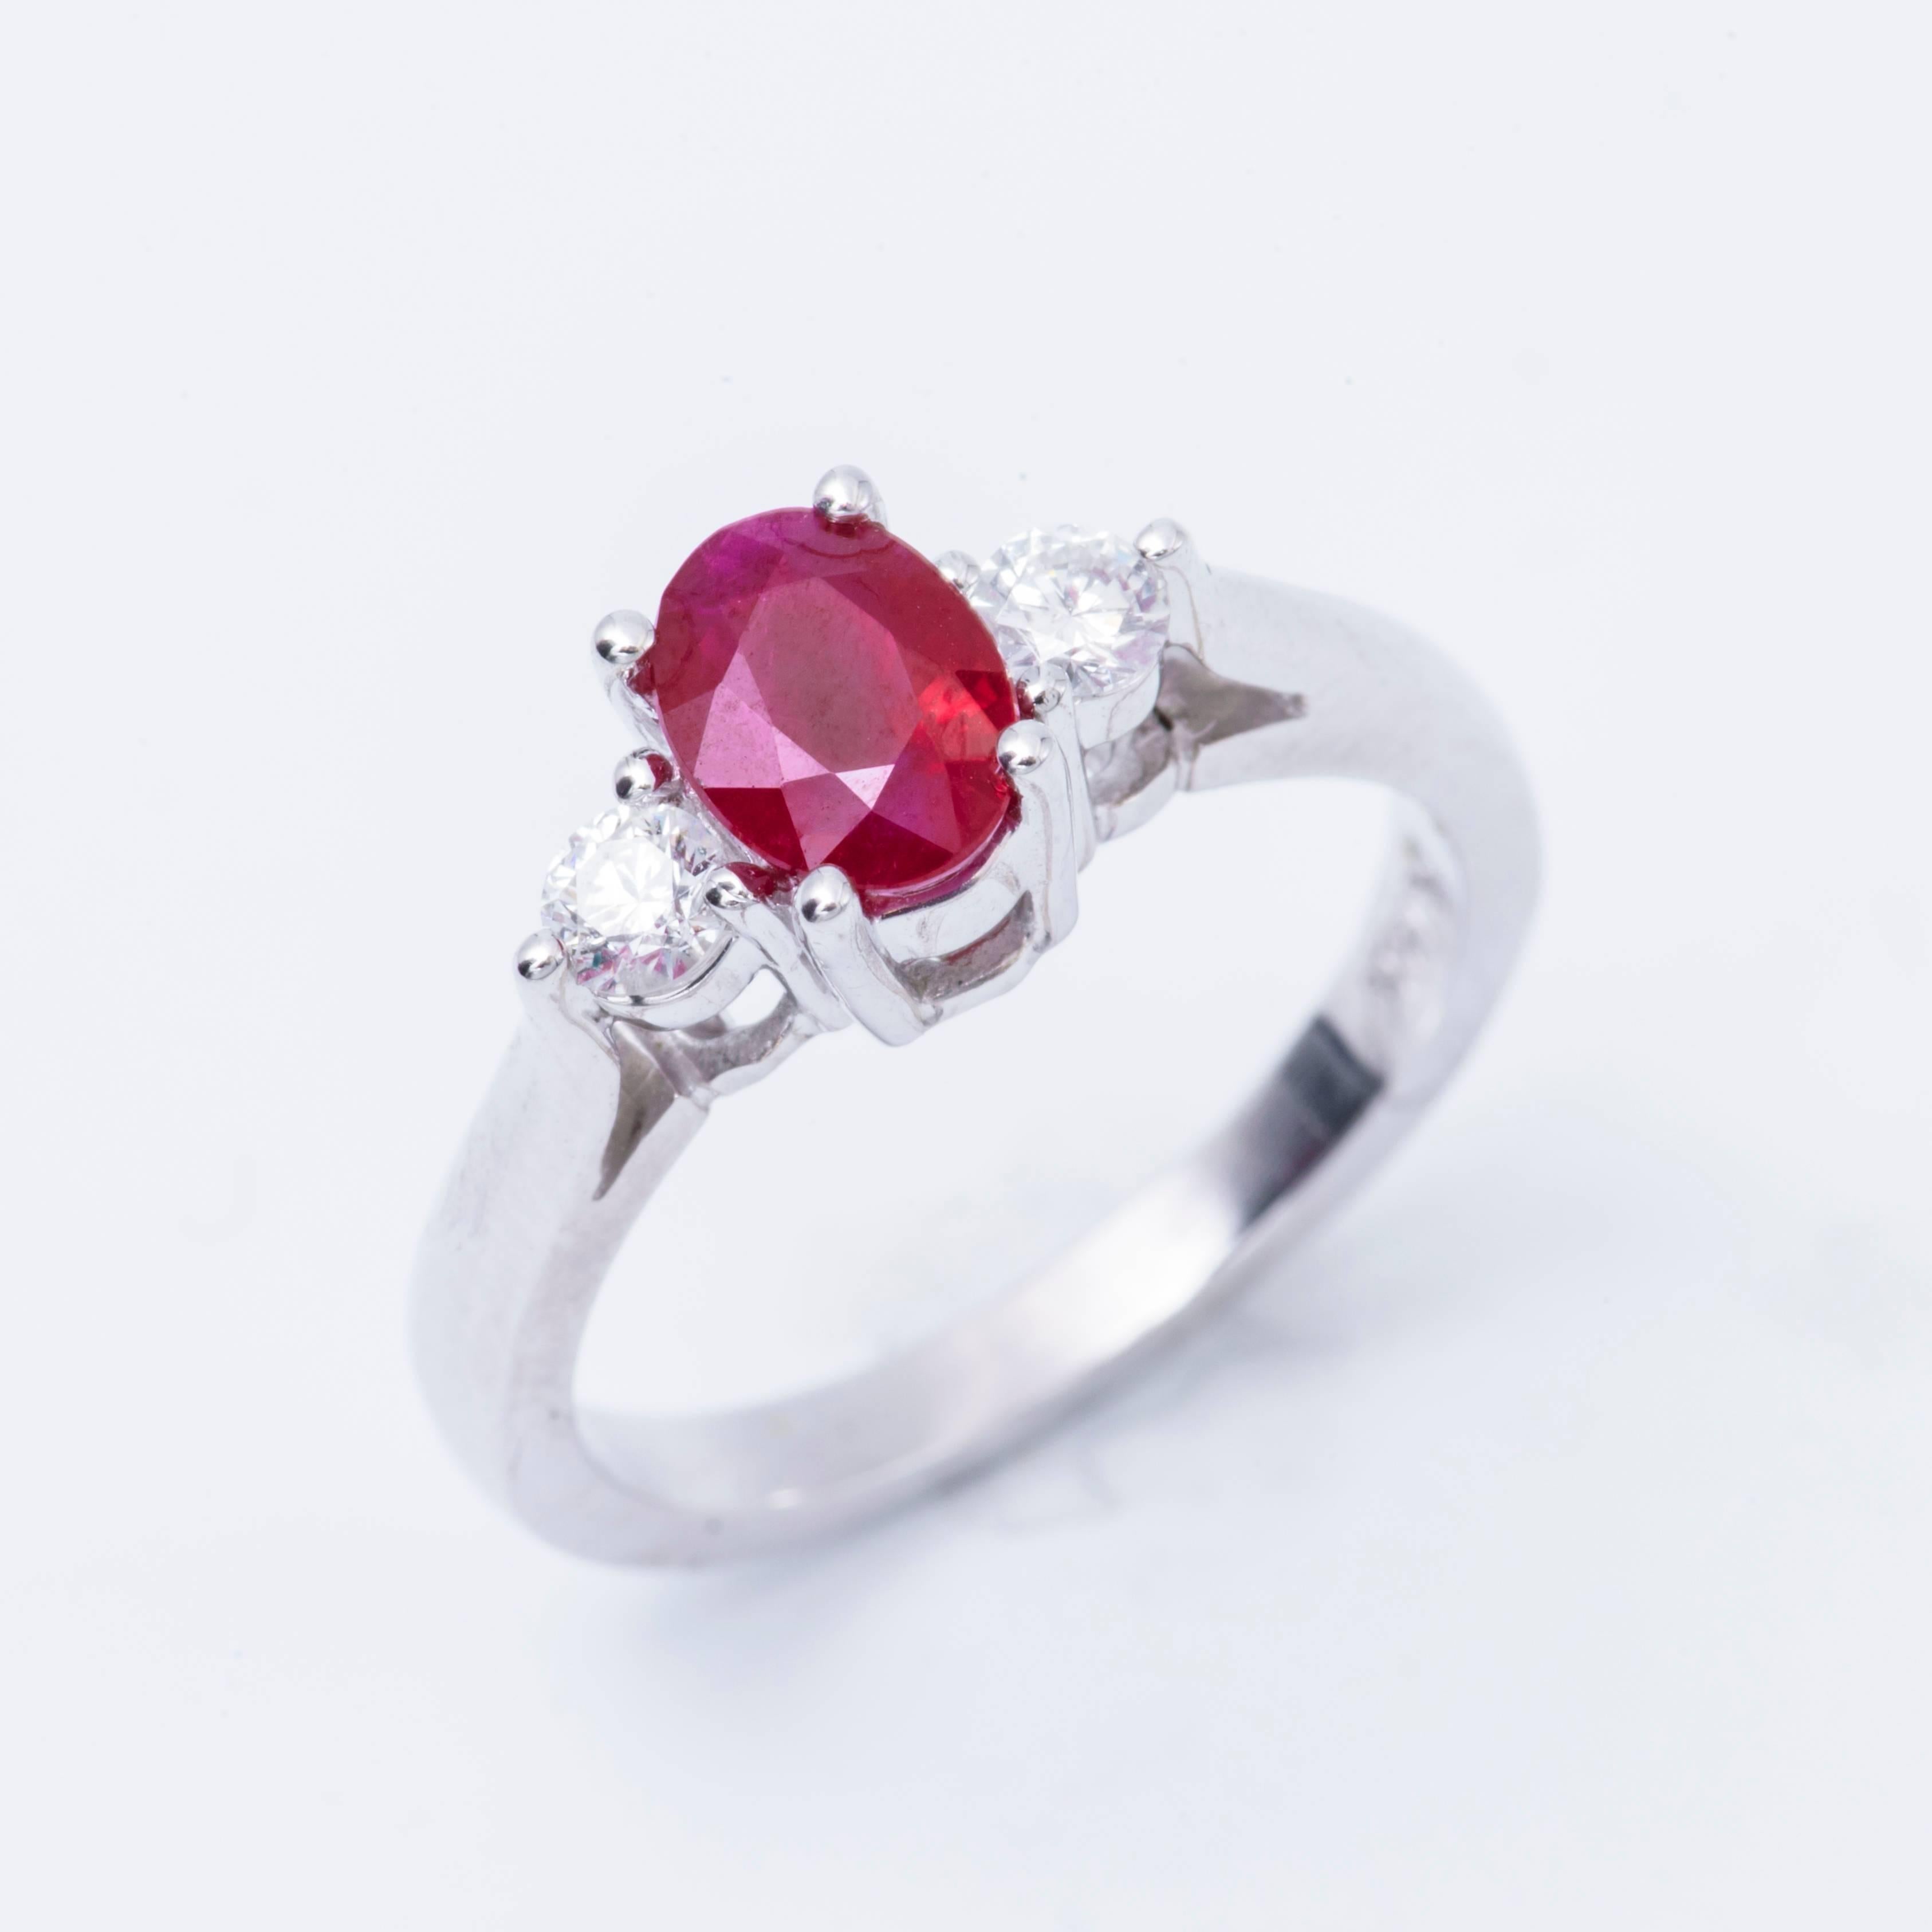 Style: 14 K  Oval Shape Ruby Diamond 3 stone  Engagement Ring
Material: 14k White Gold
Gemstone Details: 1 Oval Shape Ruby approximately 1.03 ct. 7x5 mm
Diamond Details: Approximately 0.22 ctw of diamonds. Diamonds are H in color and SI in